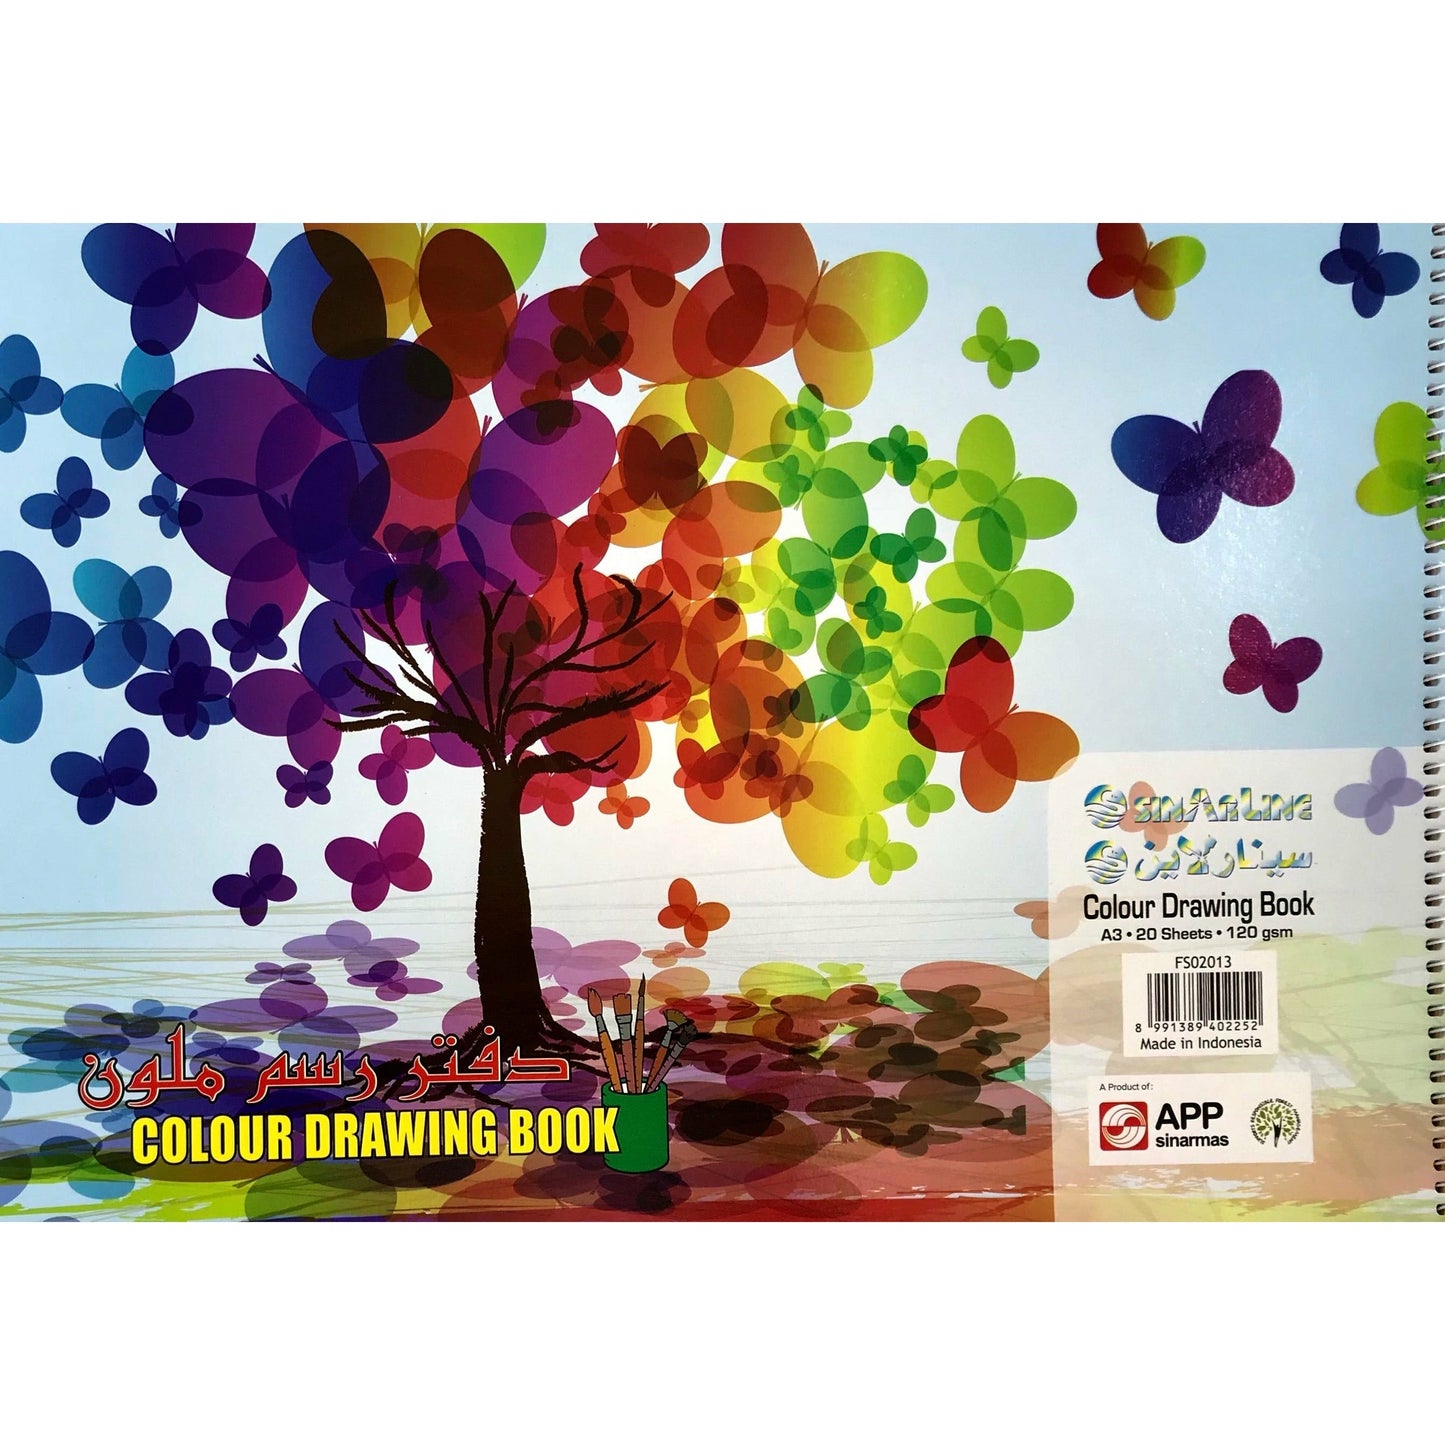 Sinarline Coloured Paper Spiral Drawing Sketch Book 120g - 20 Sheets